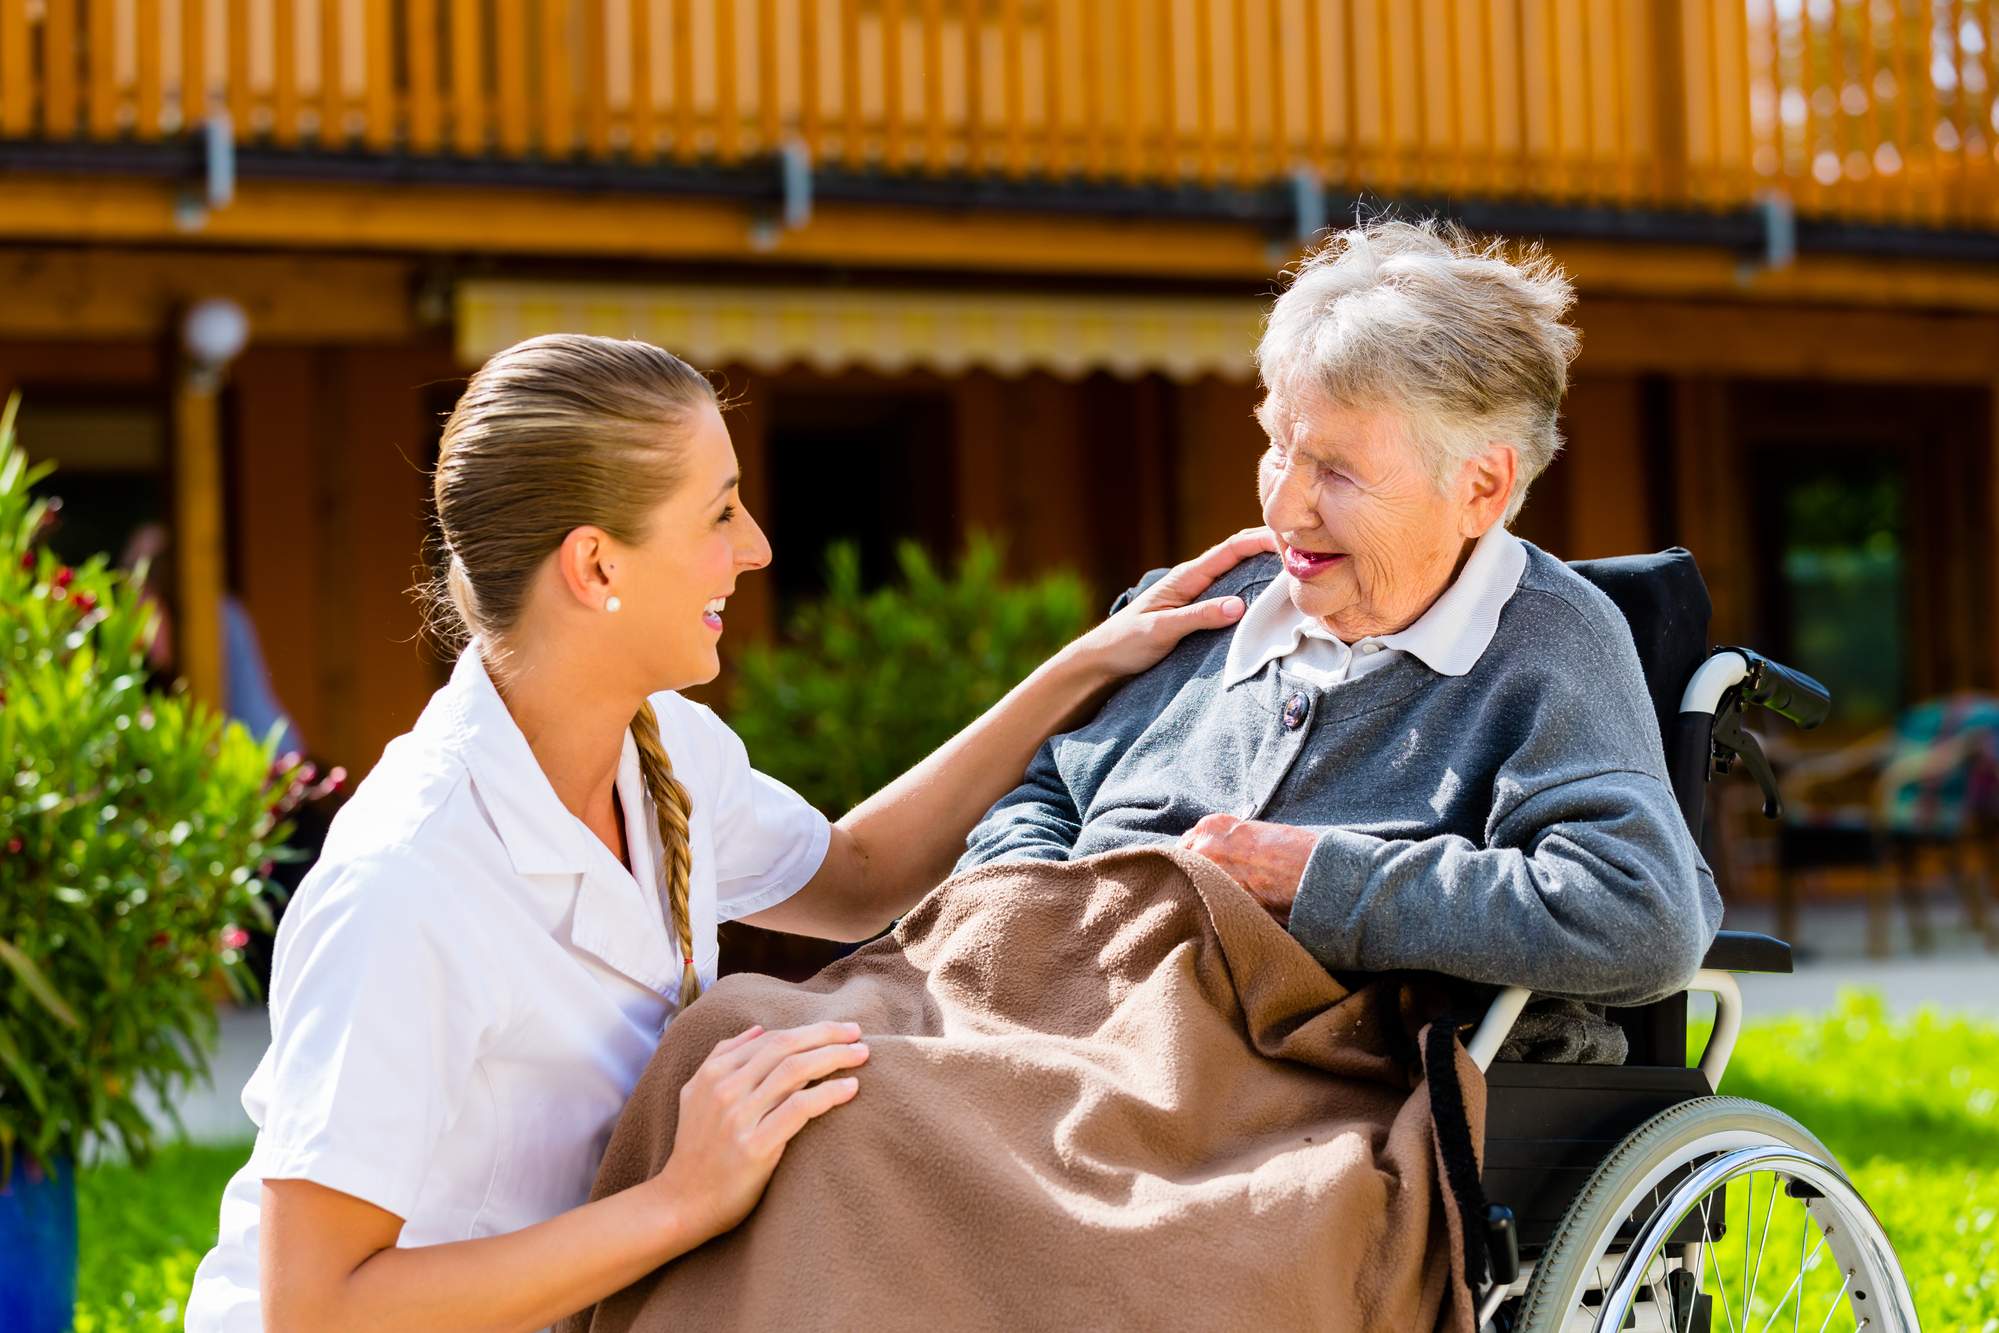 What Types of Healthcare Assistants are in high demand in Ireland?